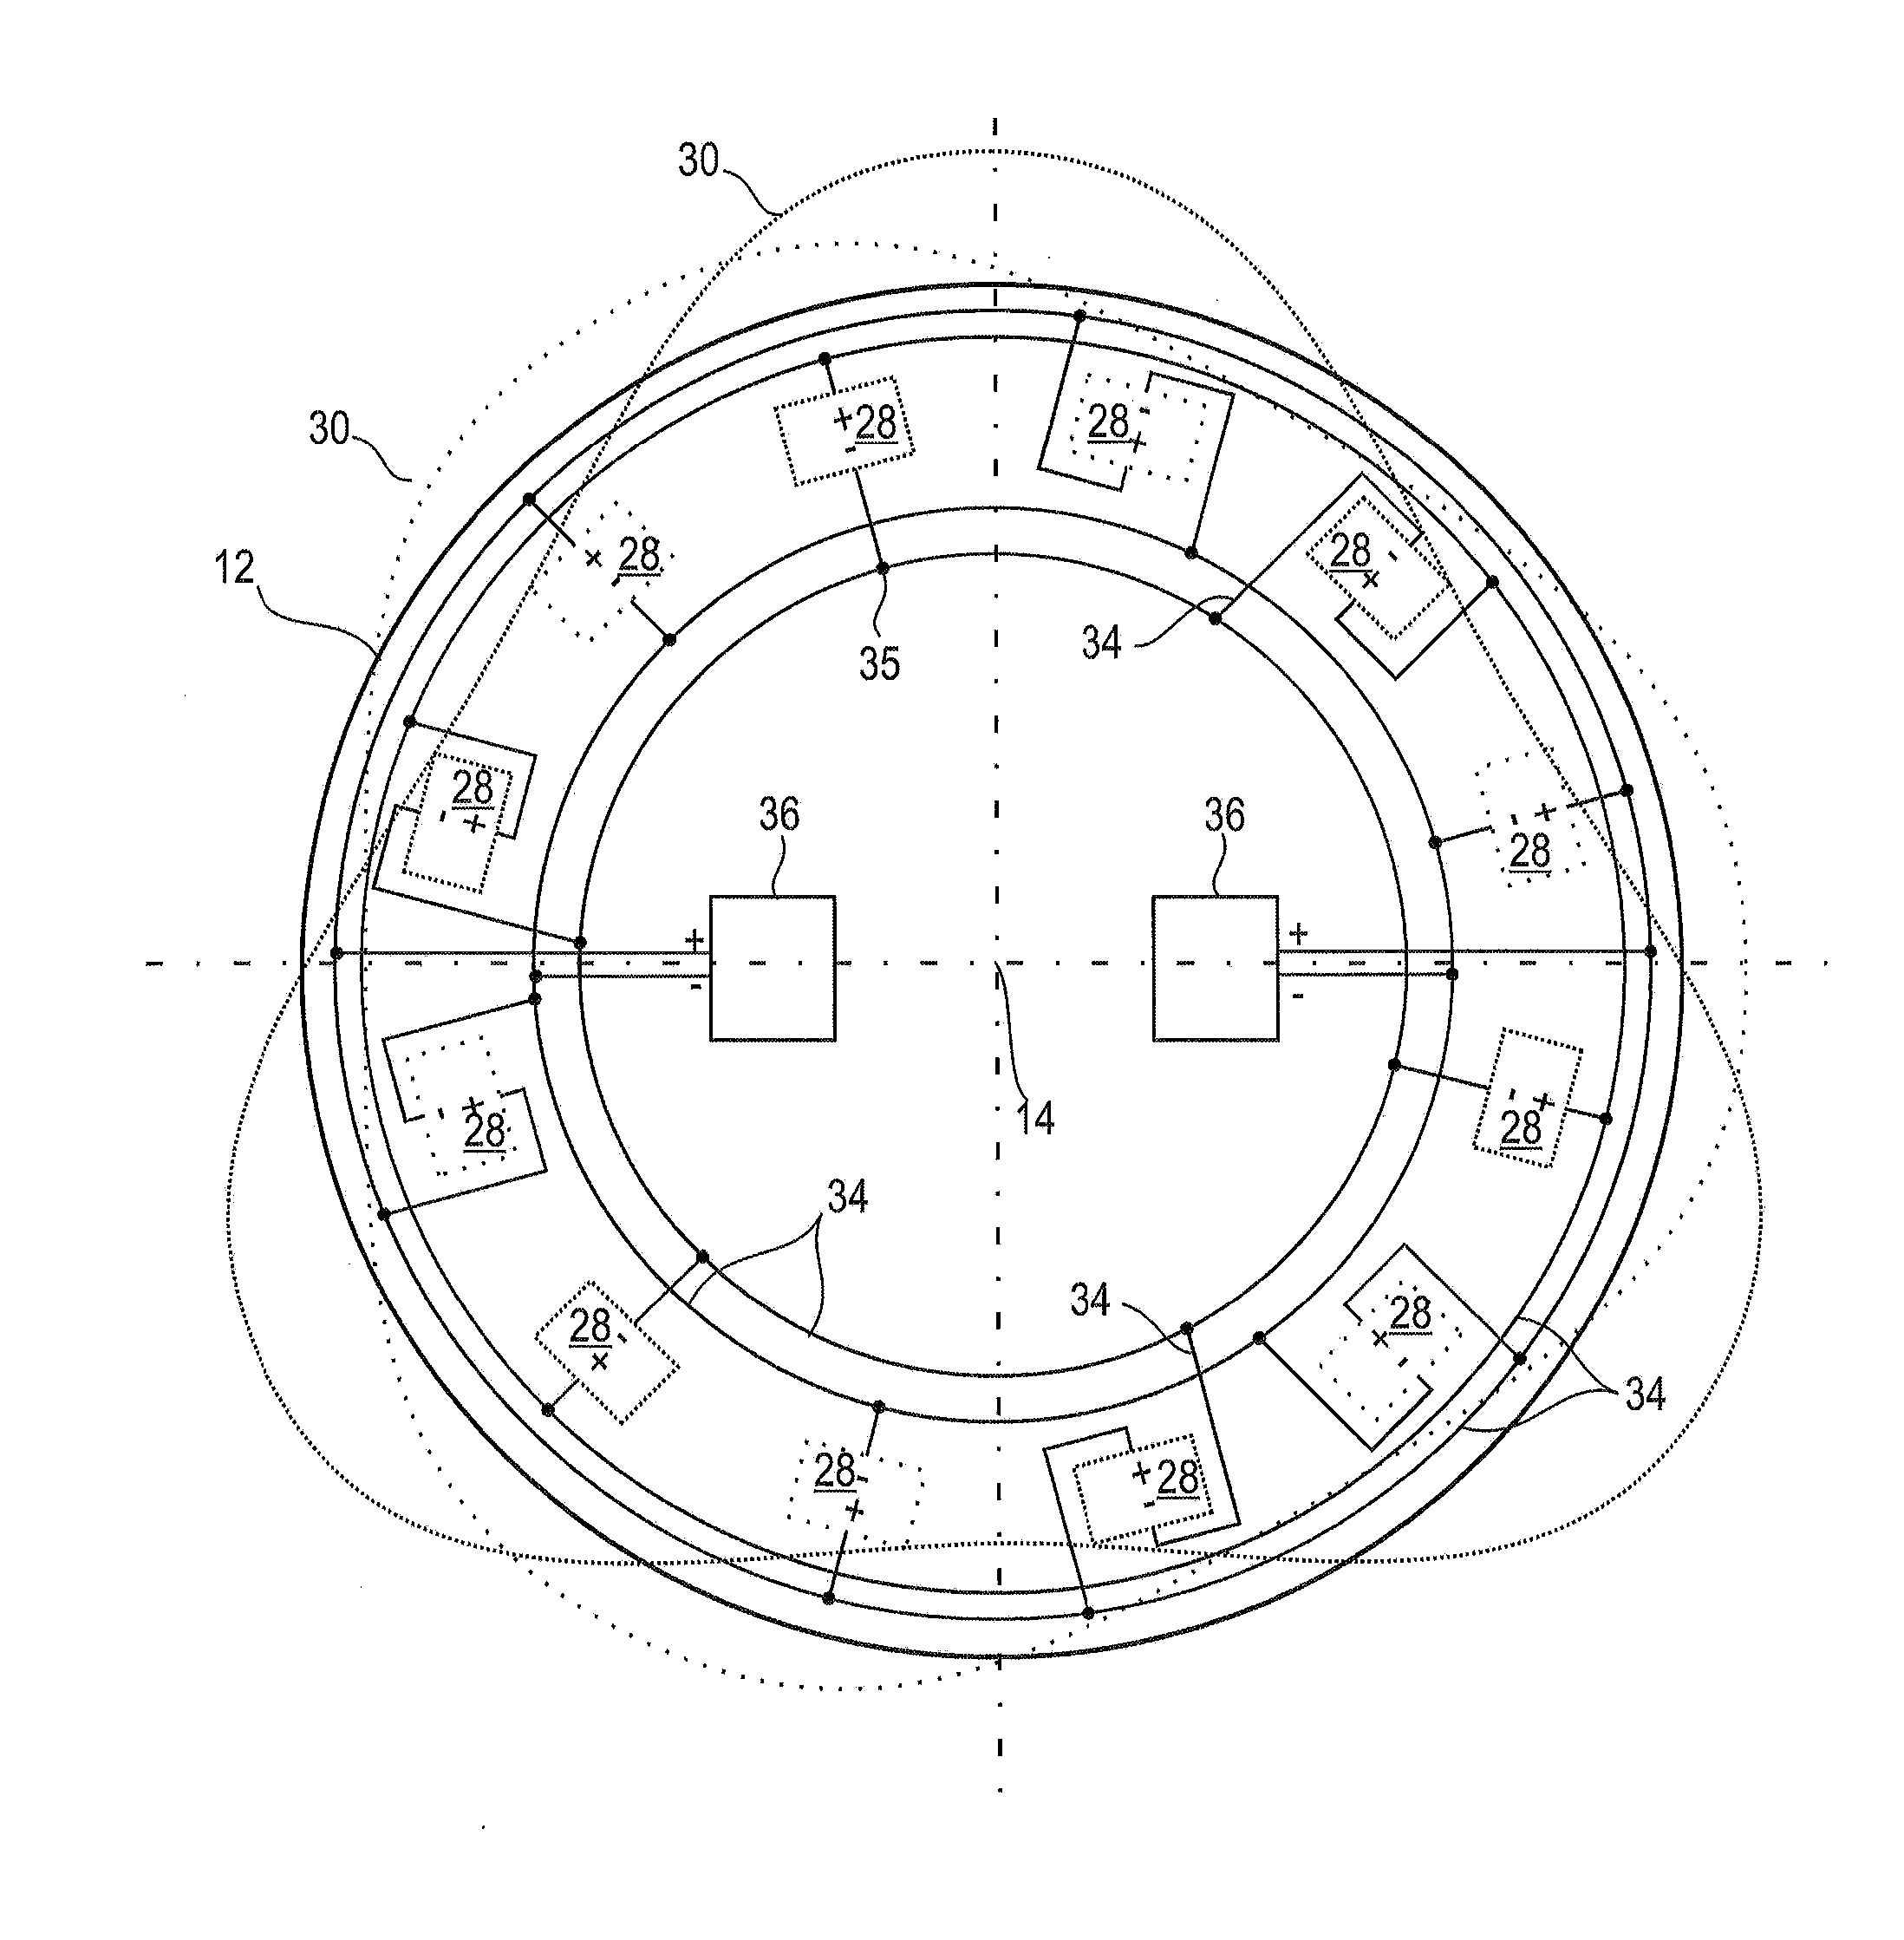 Piezoelectric Damper System for an Axial Turbomachine Rotor